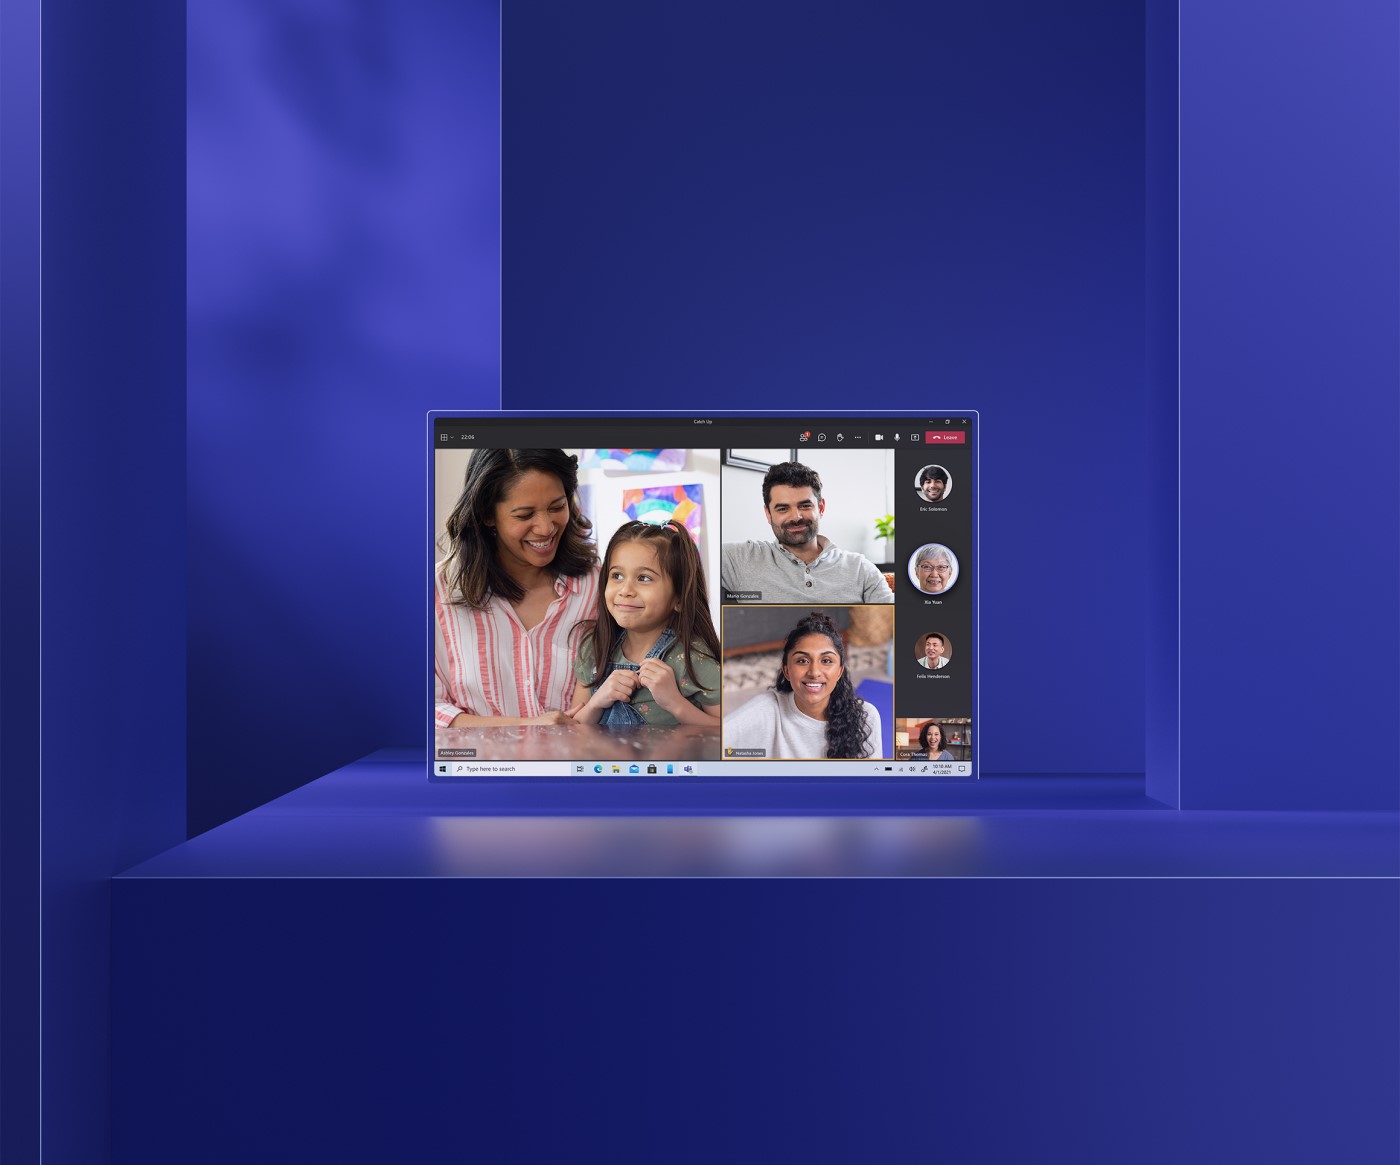 A video chat with family